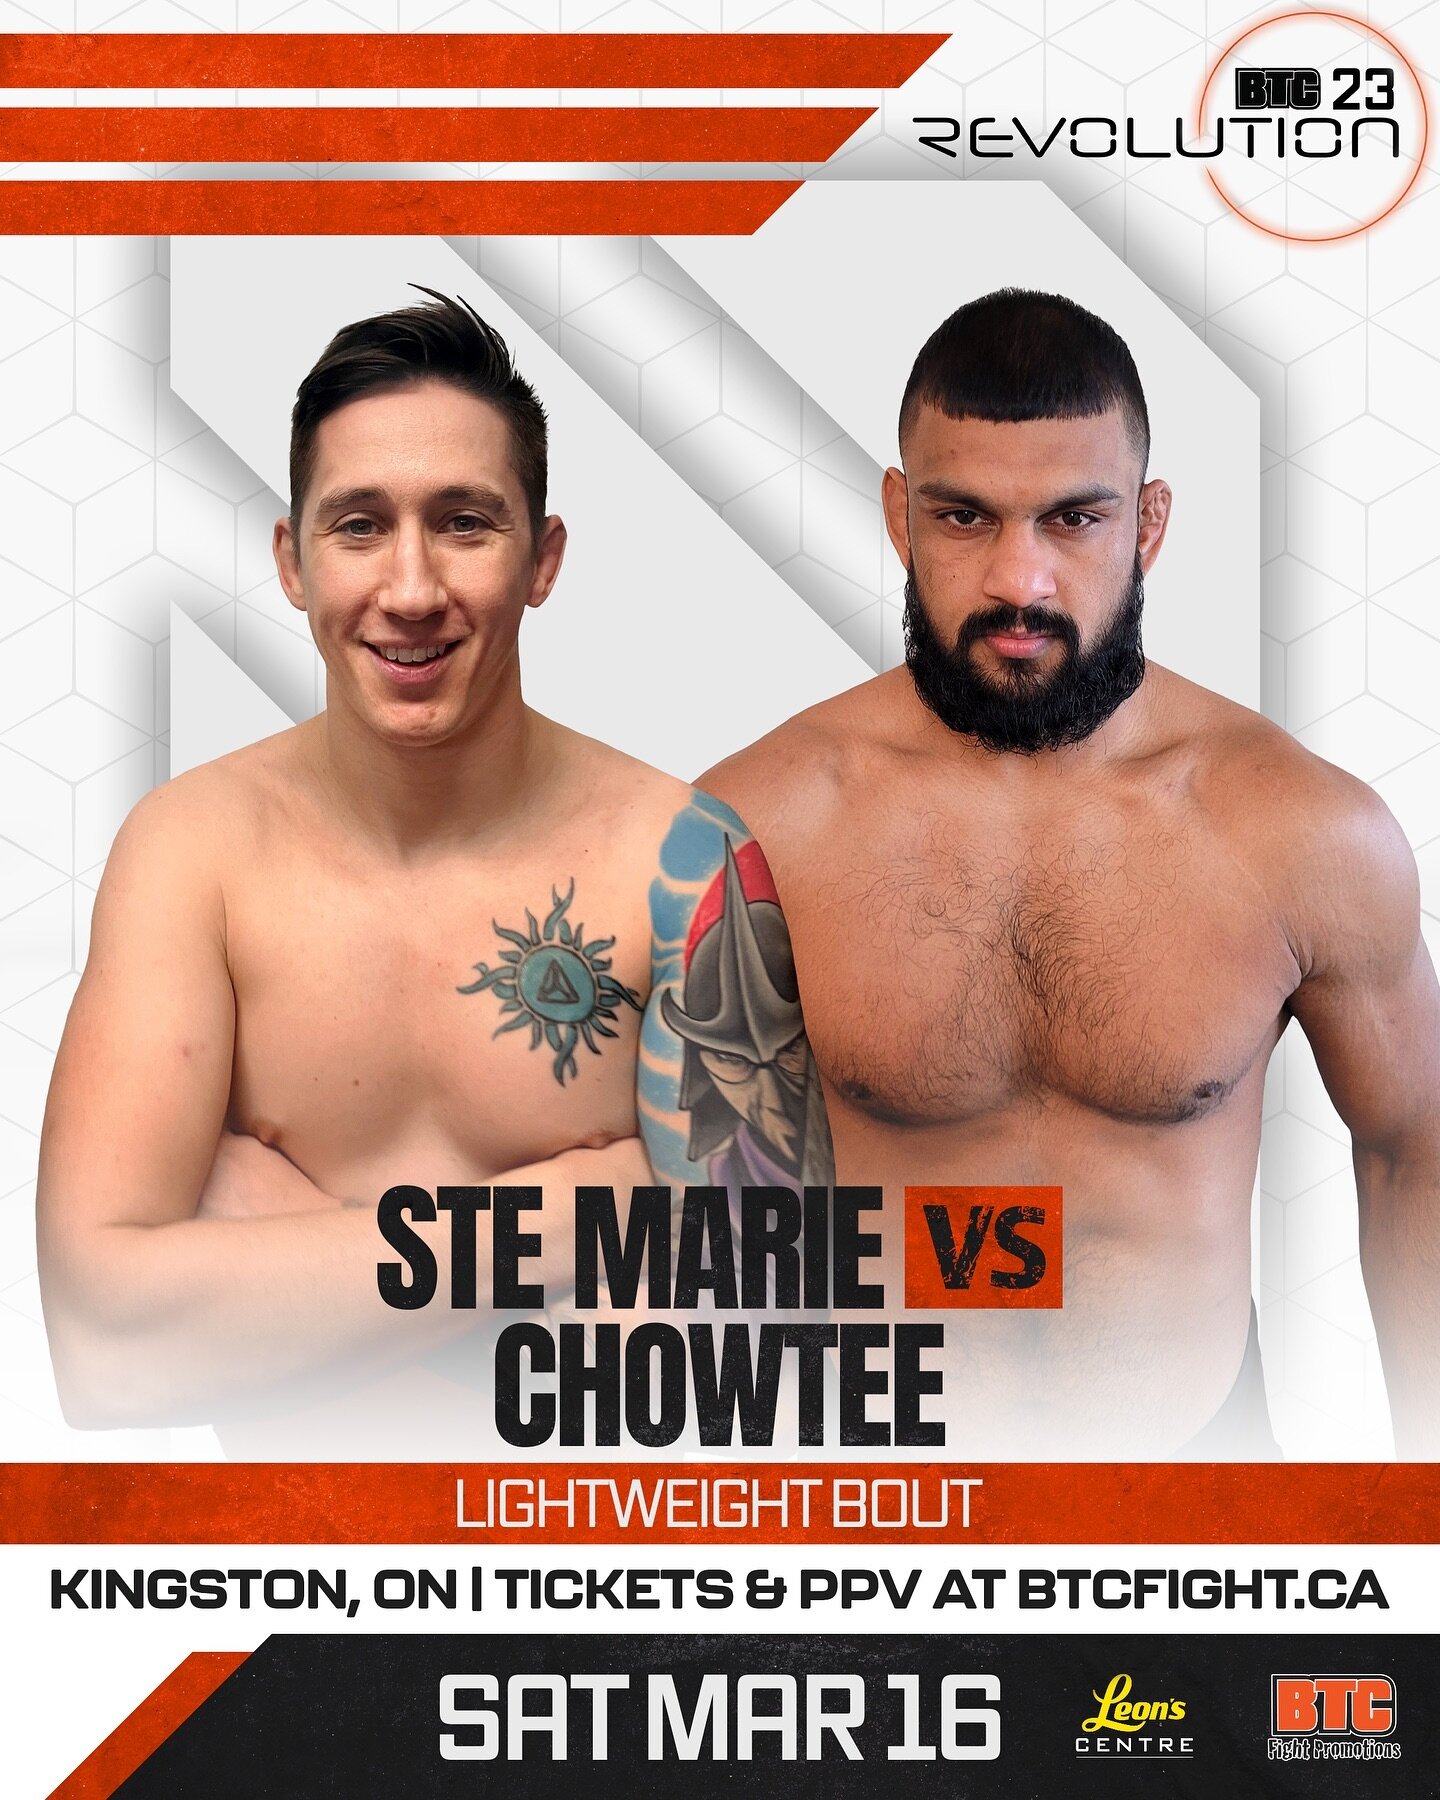 PJ Ste Marie vs Avinash Chowtee ⚔️ Kingston&rsquo;s own @PJSteMarie returns to the BTC Fight cage in his hometown to take on heavy hitter @AvinashChowtee from Toronto&rsquo;s @EvolucaoThai #BTC23 #Kingston #LeonsCentre